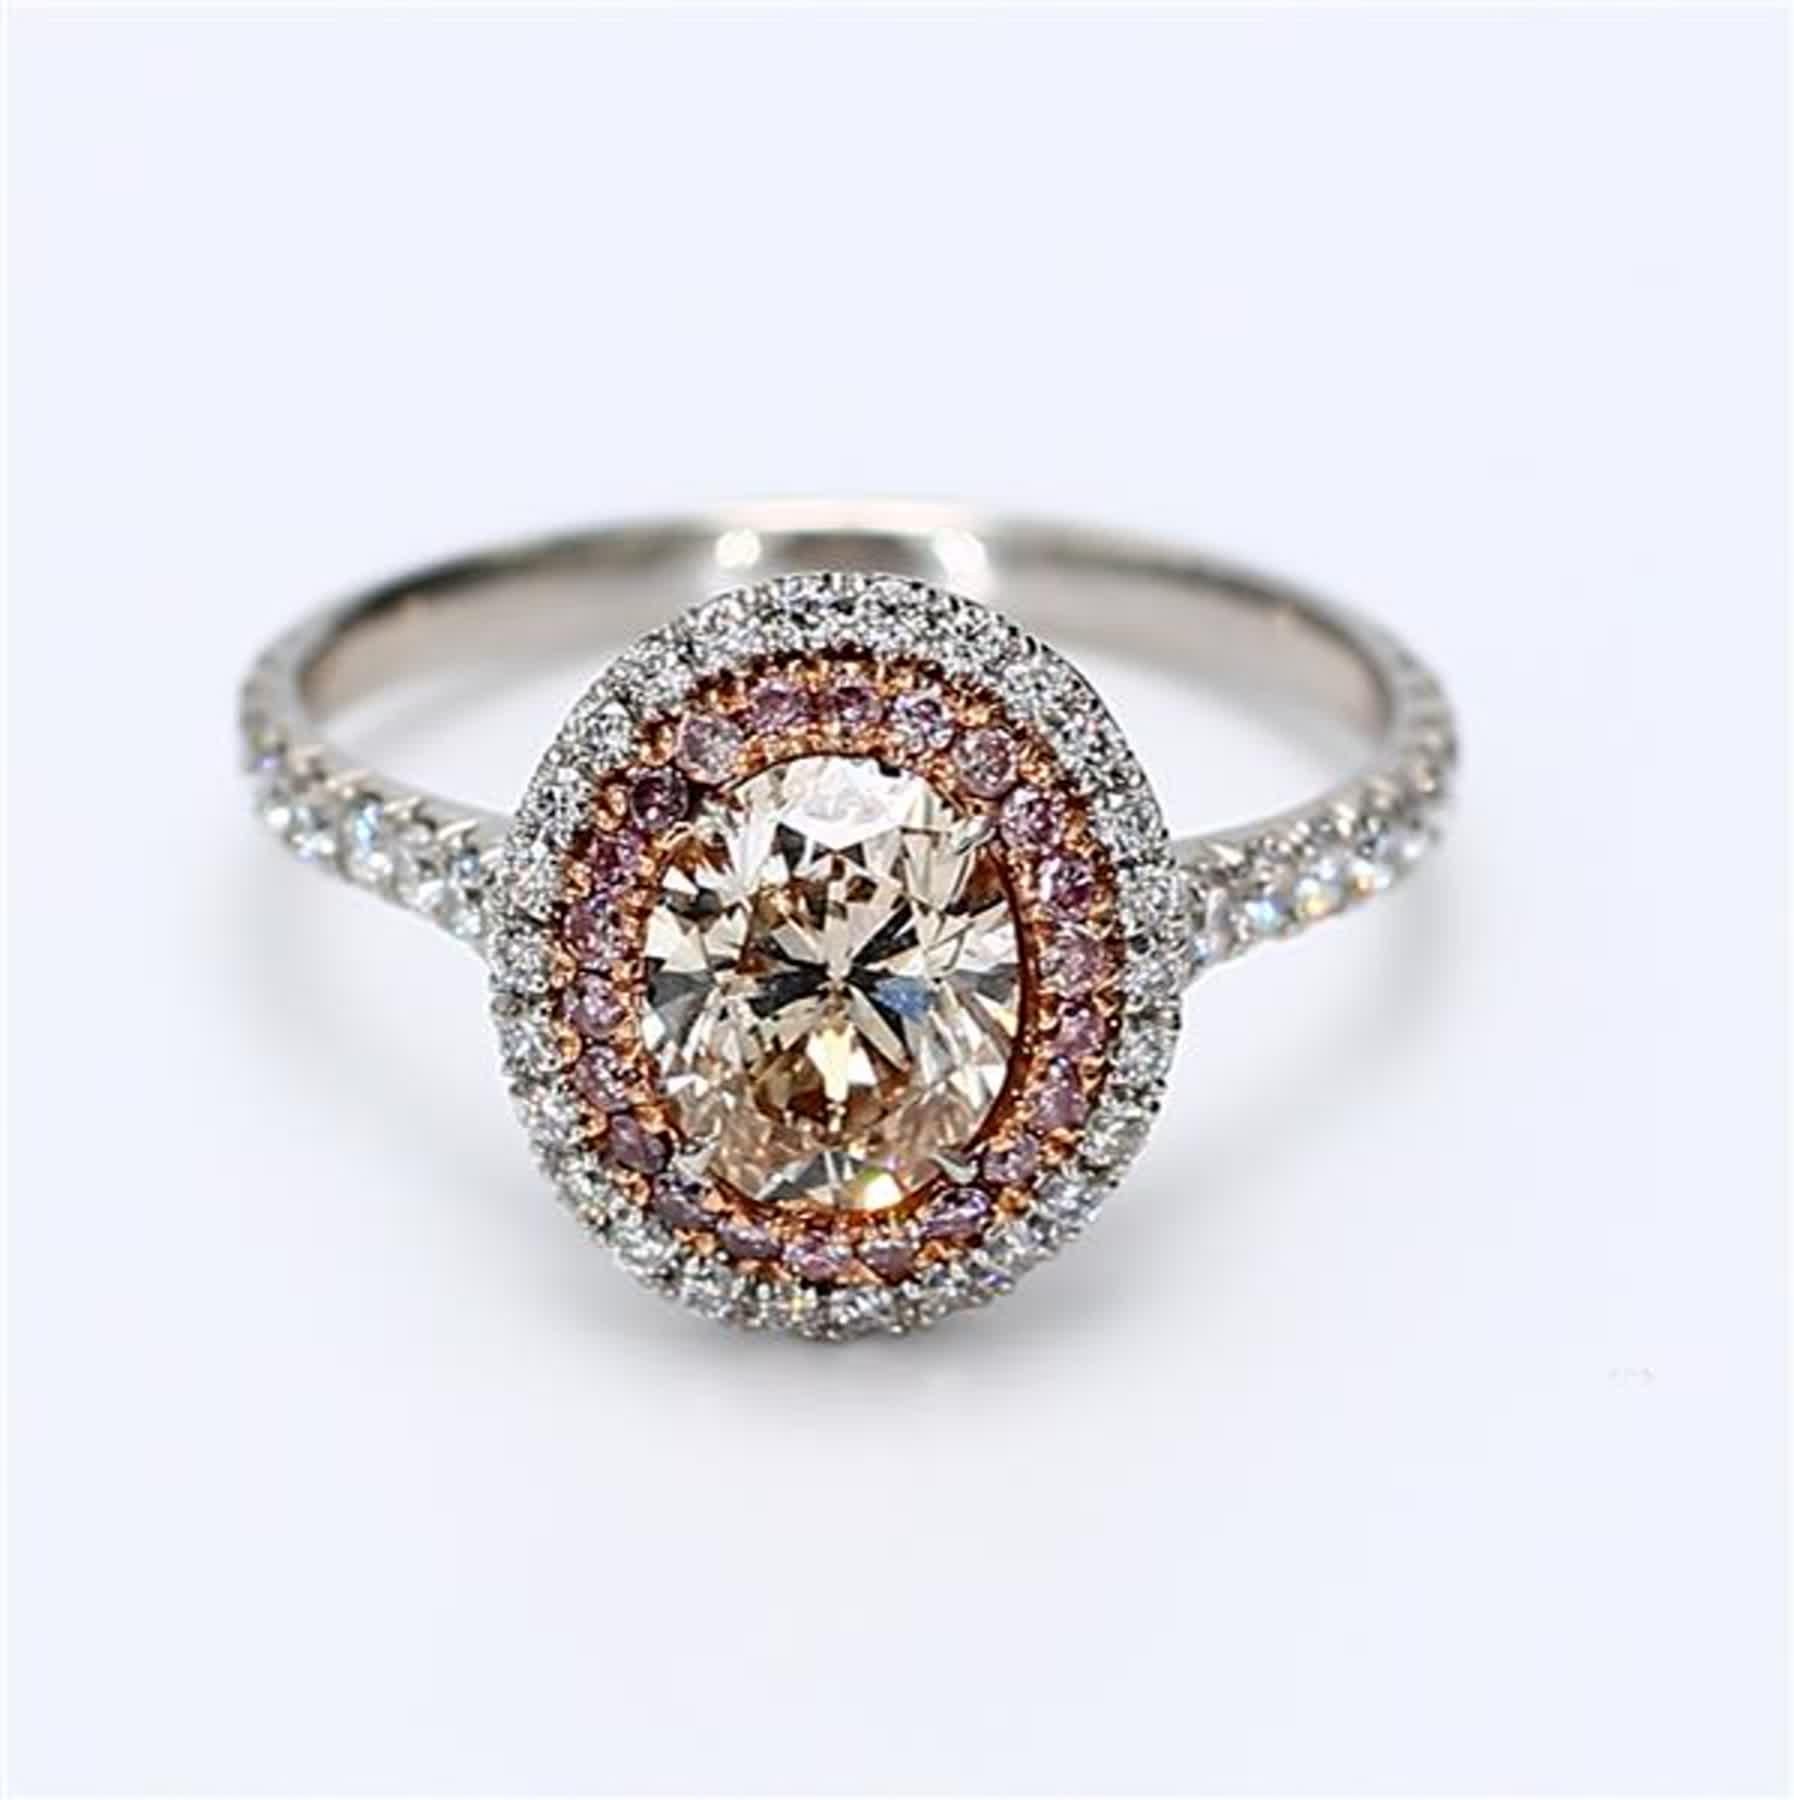 RareGemWorld's classic GIA certified diamond ring. Mounted in a beautiful 18K White Gold setting with a natural oval cut pink diamond. The pink diamond is surrounded by round natural pink diamond melee and round natural white diamond melee. This